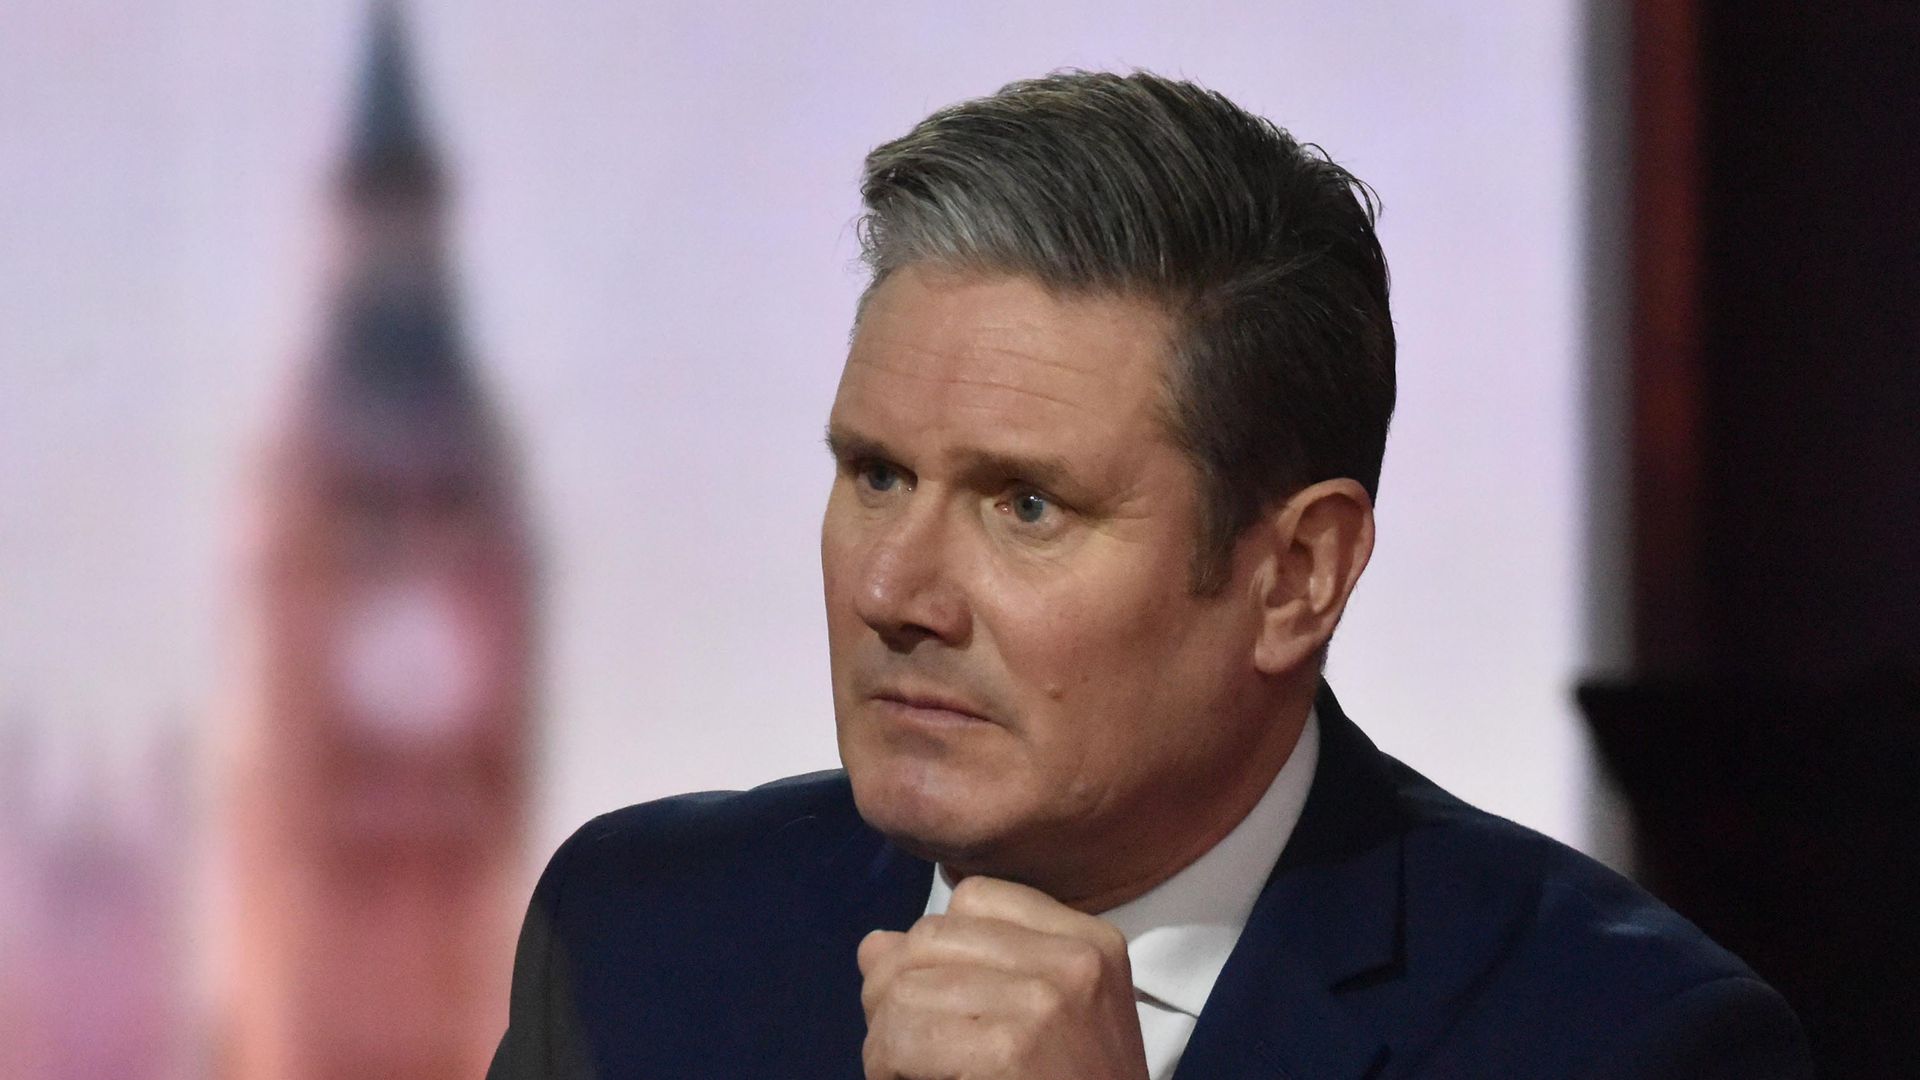 Labour leader Sir Keir Starmer appearing on the BBC1 current affairs programme, The Andrew Marr Show. - Credit: PA